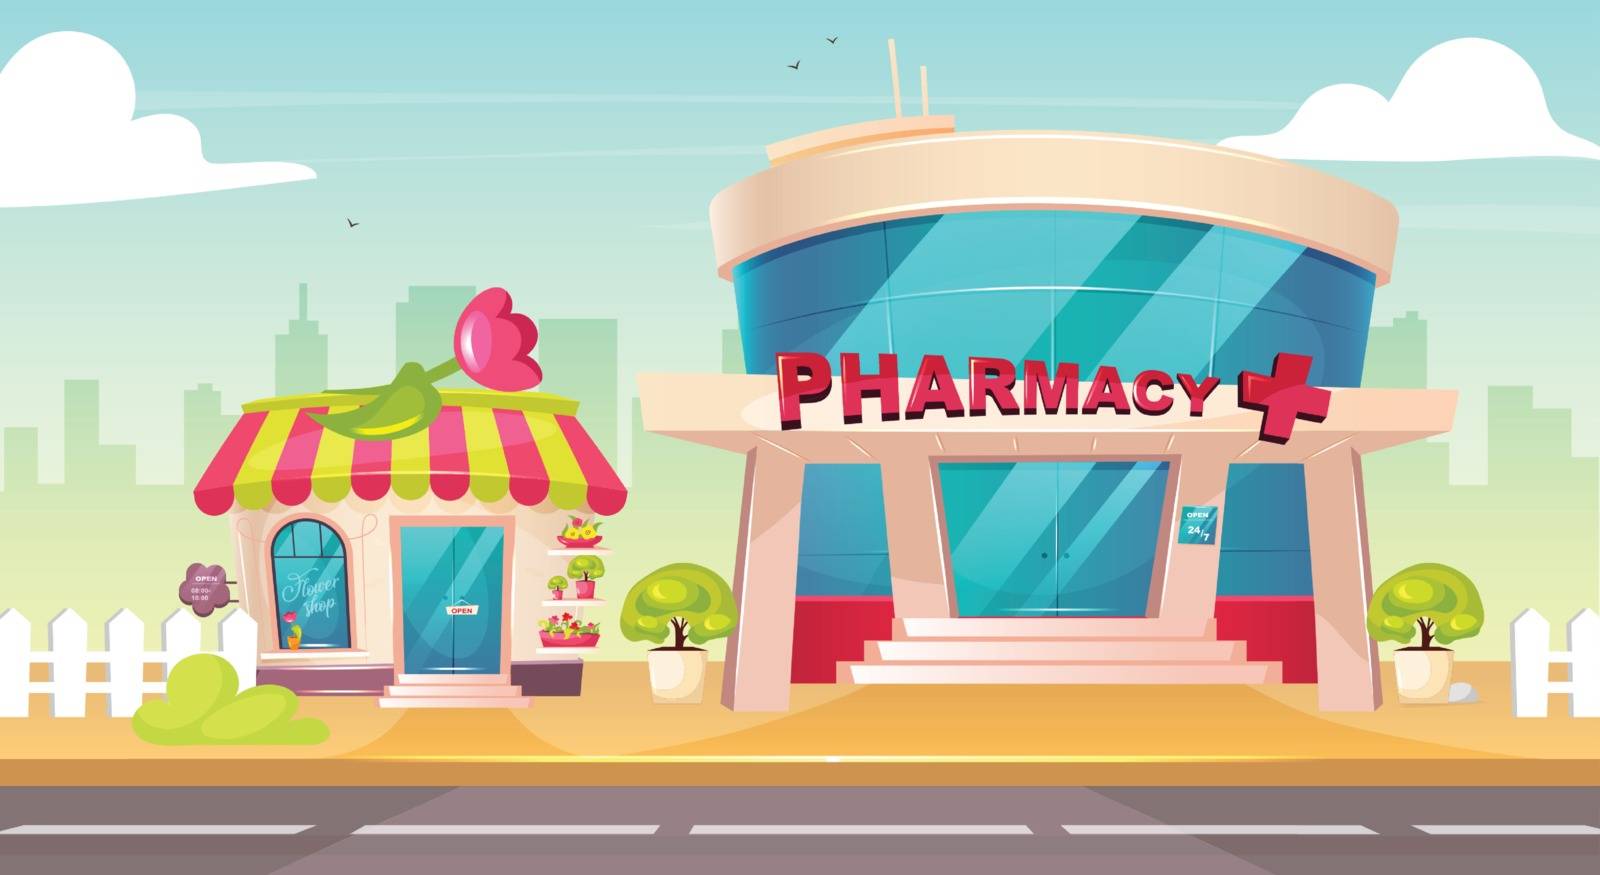 City center flat color vector illustration. Flower shop front. Pharmacy glass building exterior. Drugstore entrance with nobody outside. Cute 2D cartoon cityscape with sidewalk on background